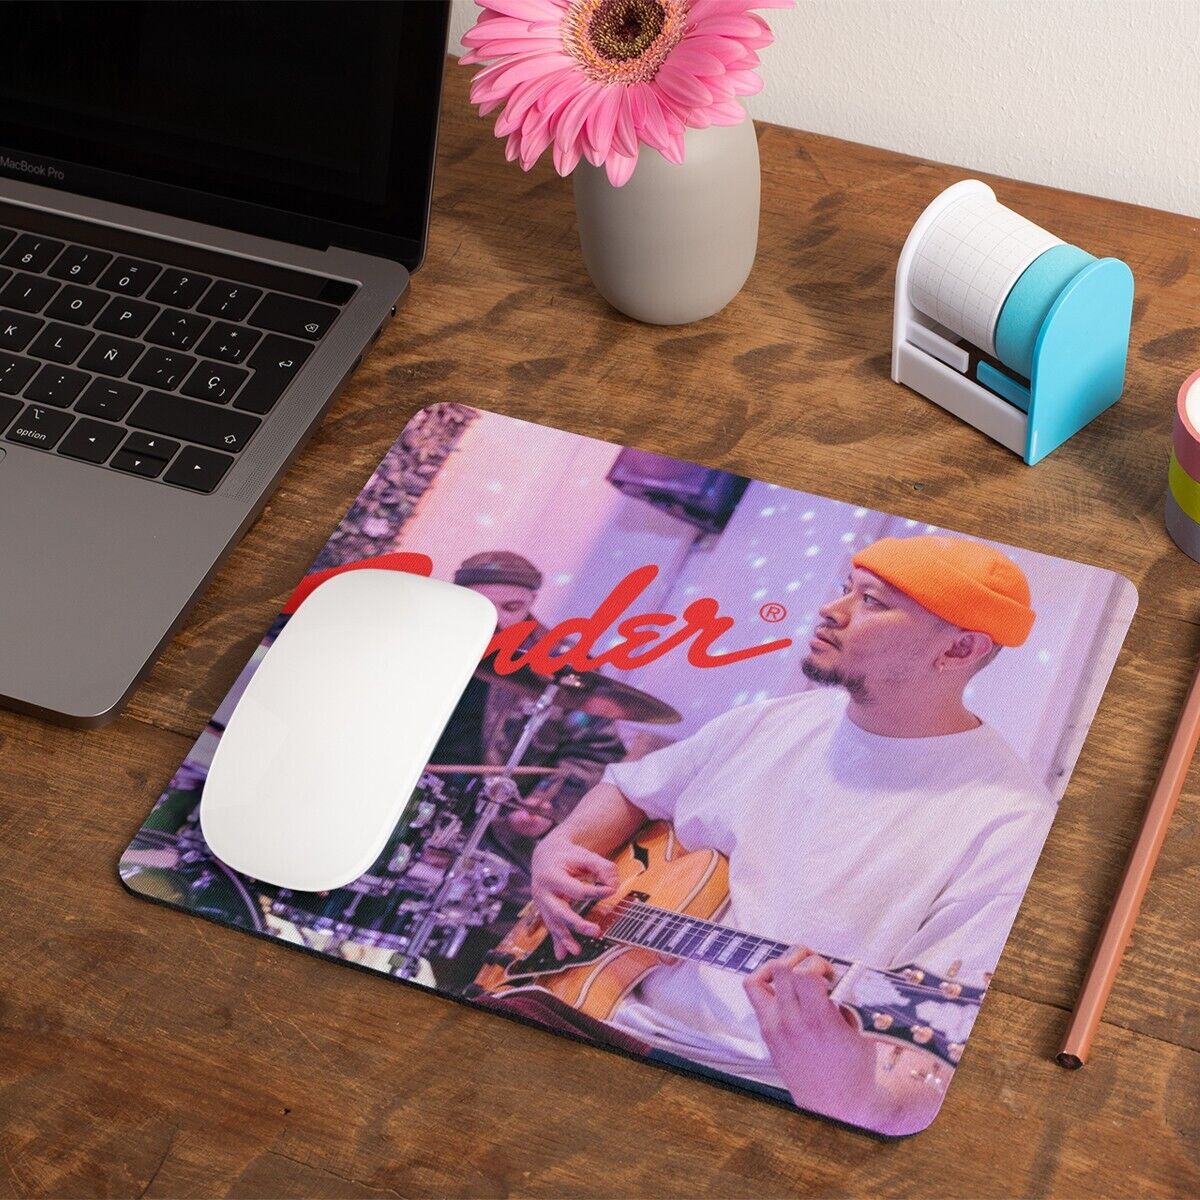 Personalized Fender Stratocaster telecaster Guitar Owner Mouse Pad Gift